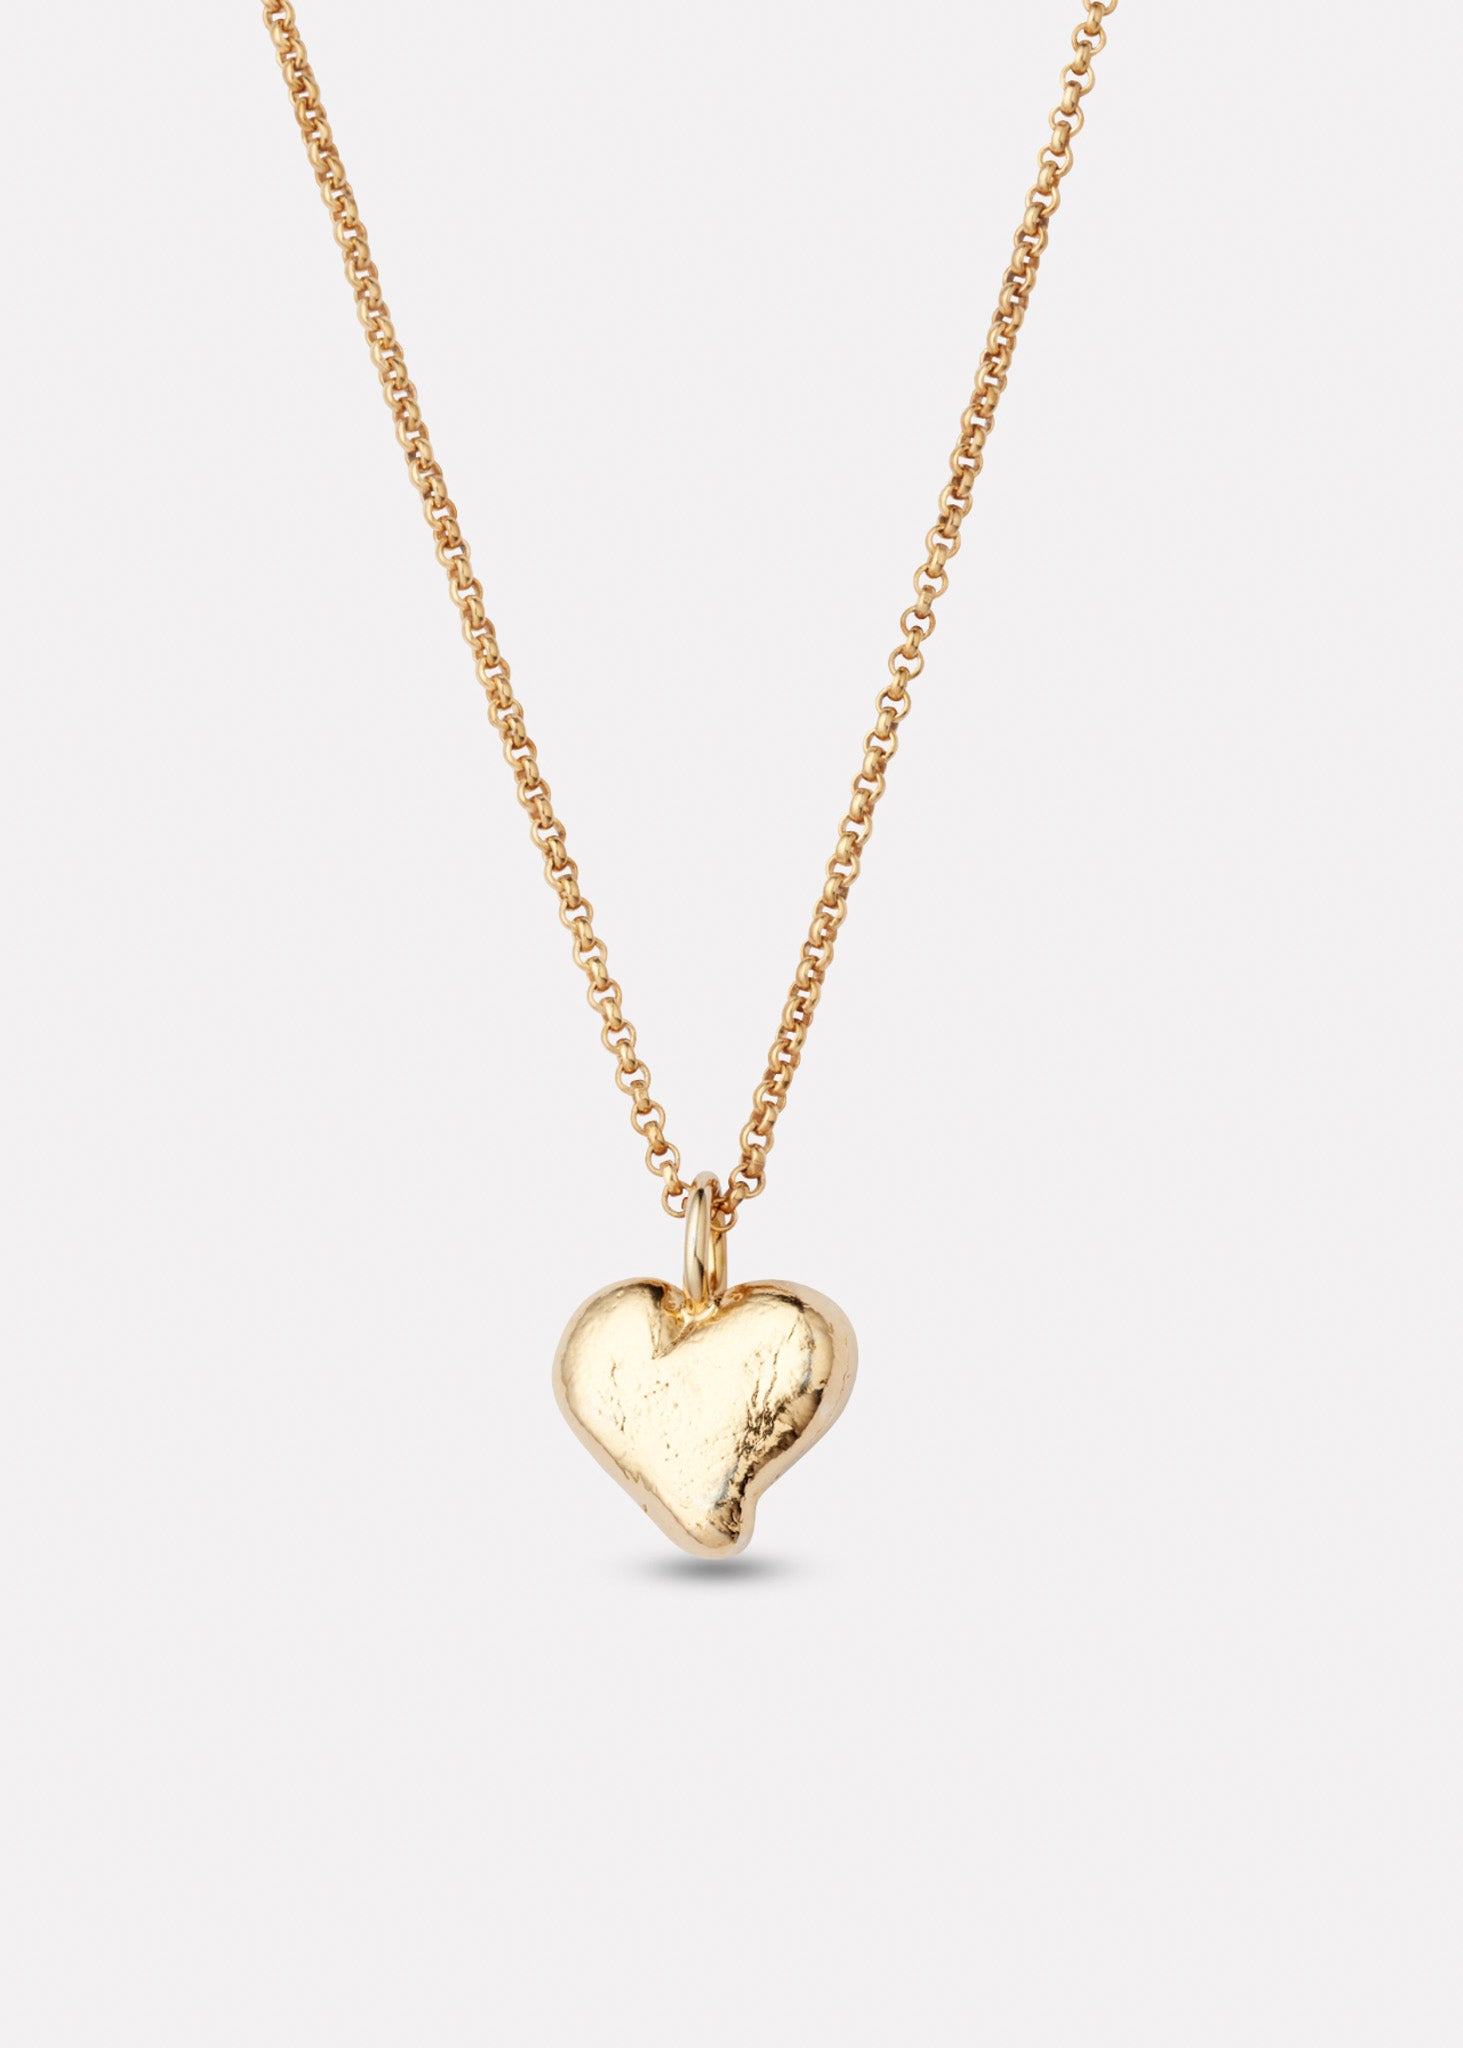 Mia heart pendant in gold-plated silver with chain, medium